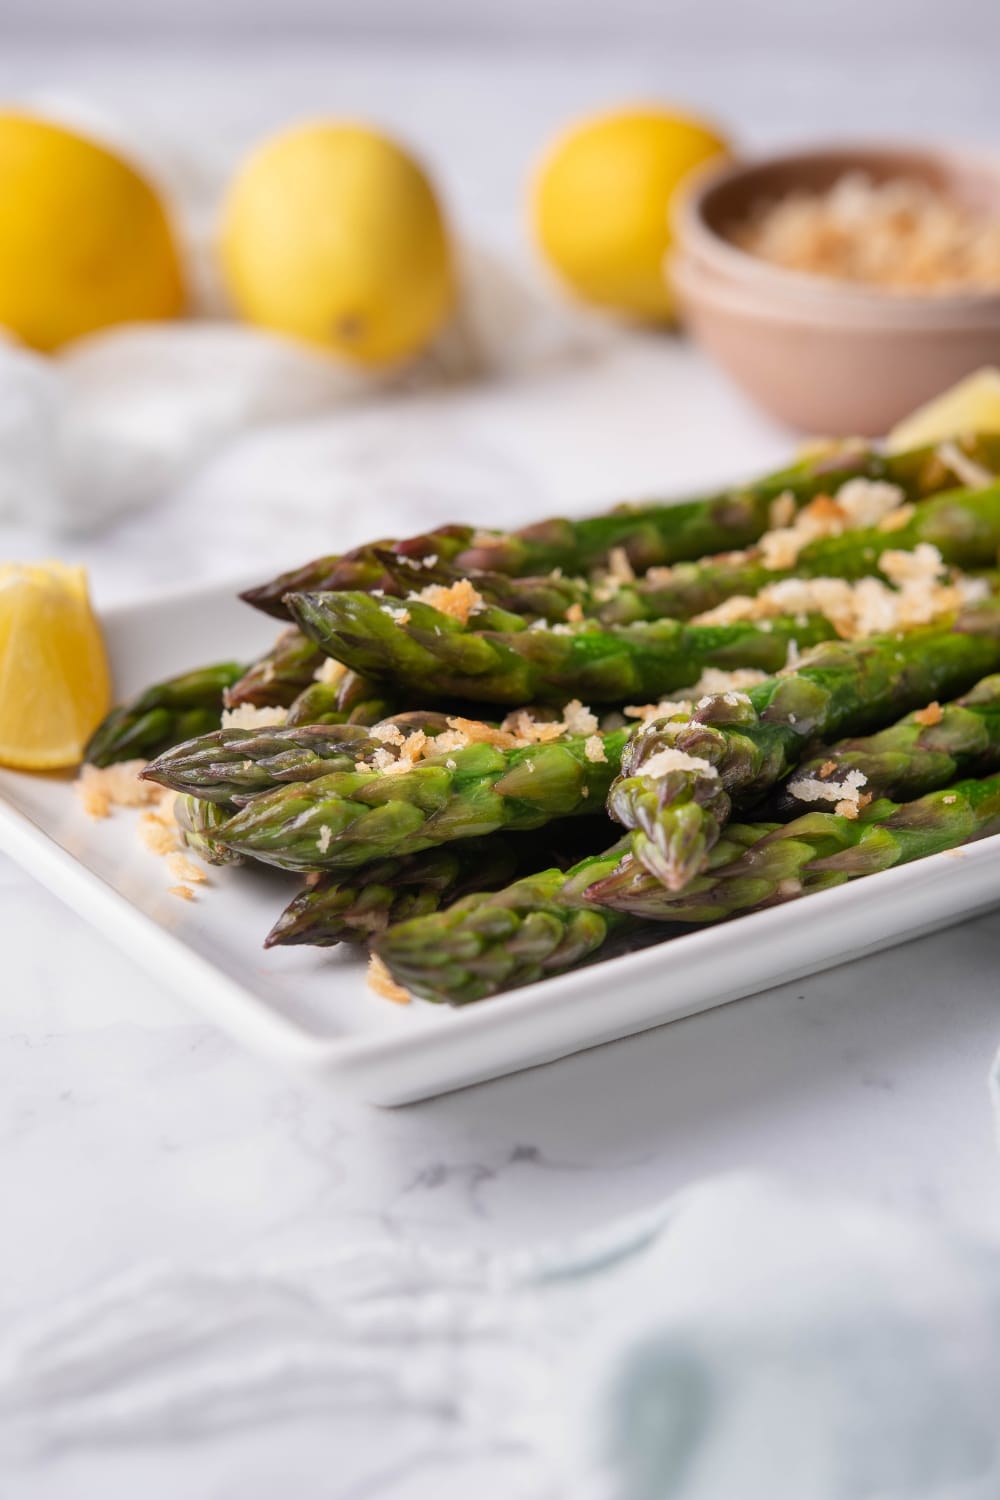 Close up of sauteed asparagus on a white rectangle plate. The asparagus is garnished with breadcrumbs and served with lemon wedges. In the back are whole lemons and a bowl of breadcrumbs.